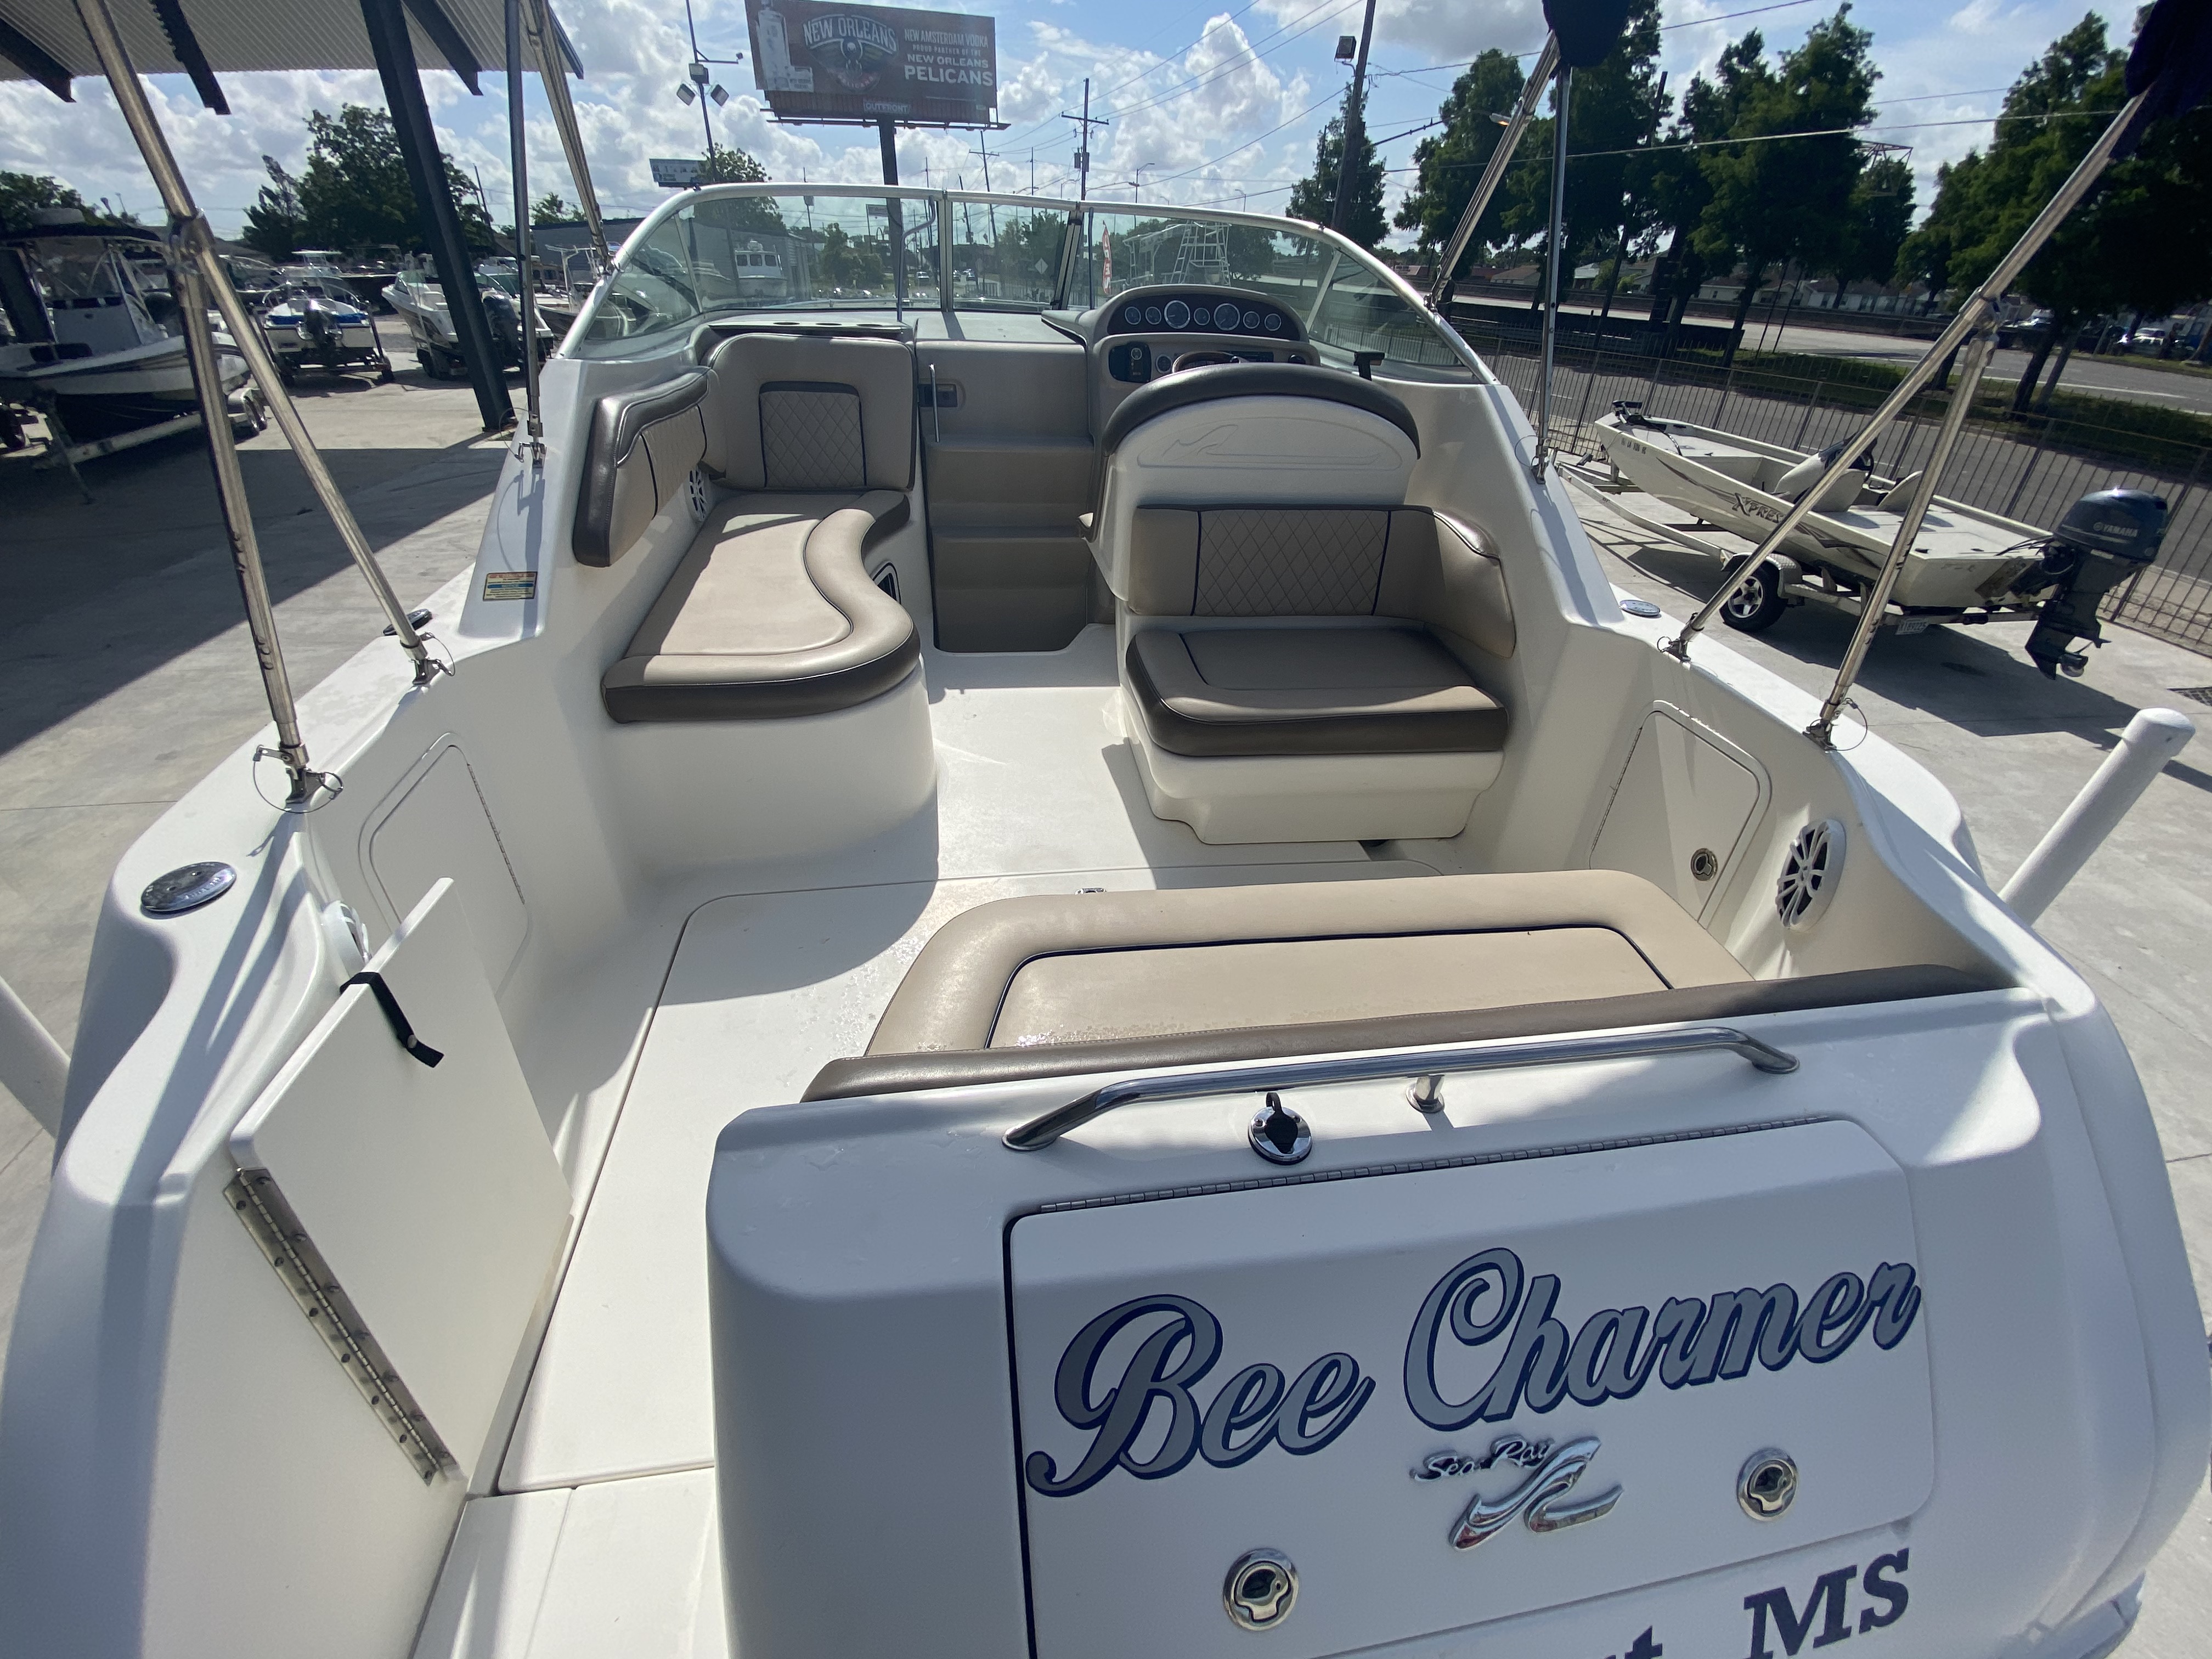 2000 Sea Ray boat for sale, model of the boat is 27 Sundancer & Image # 14 of 18